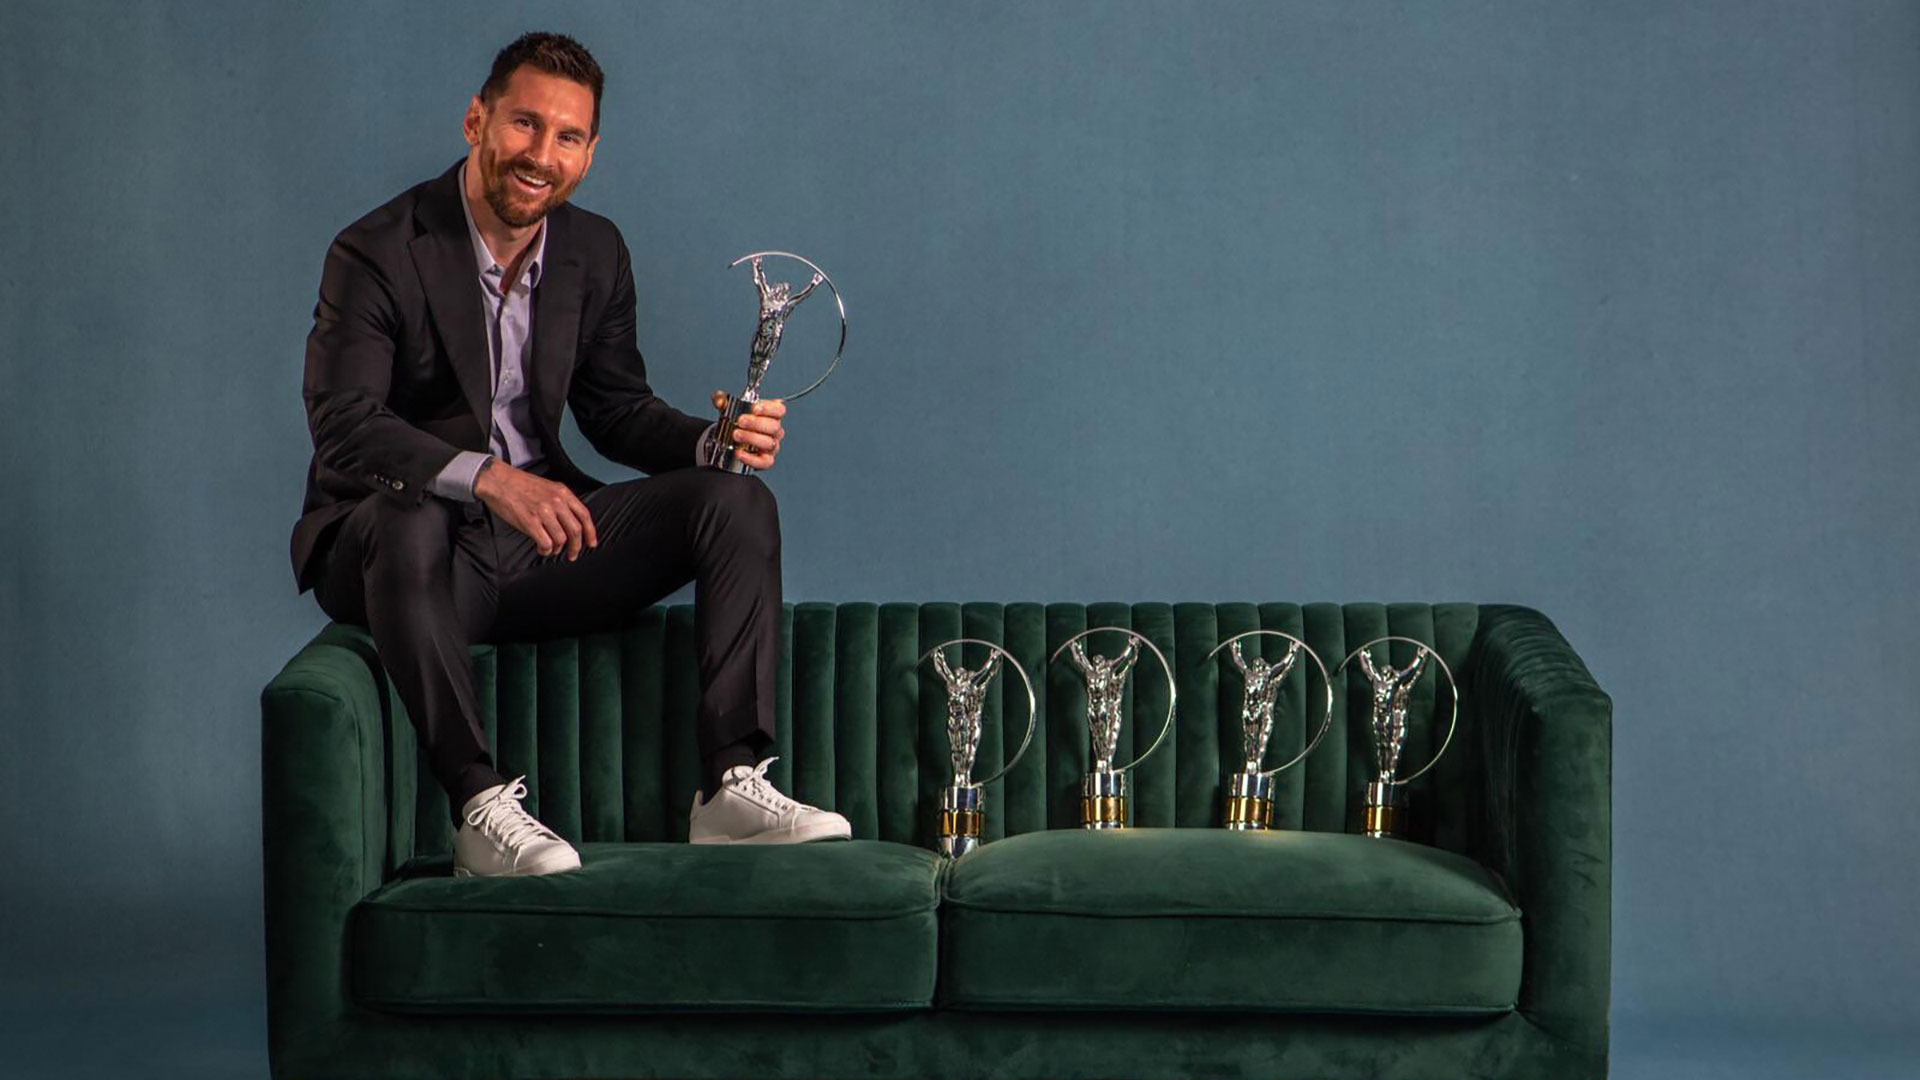 The best athletes of 2022: Lionel Messi and Shelly-Ann Fraser-Pryce, honored with the Laureus Awards